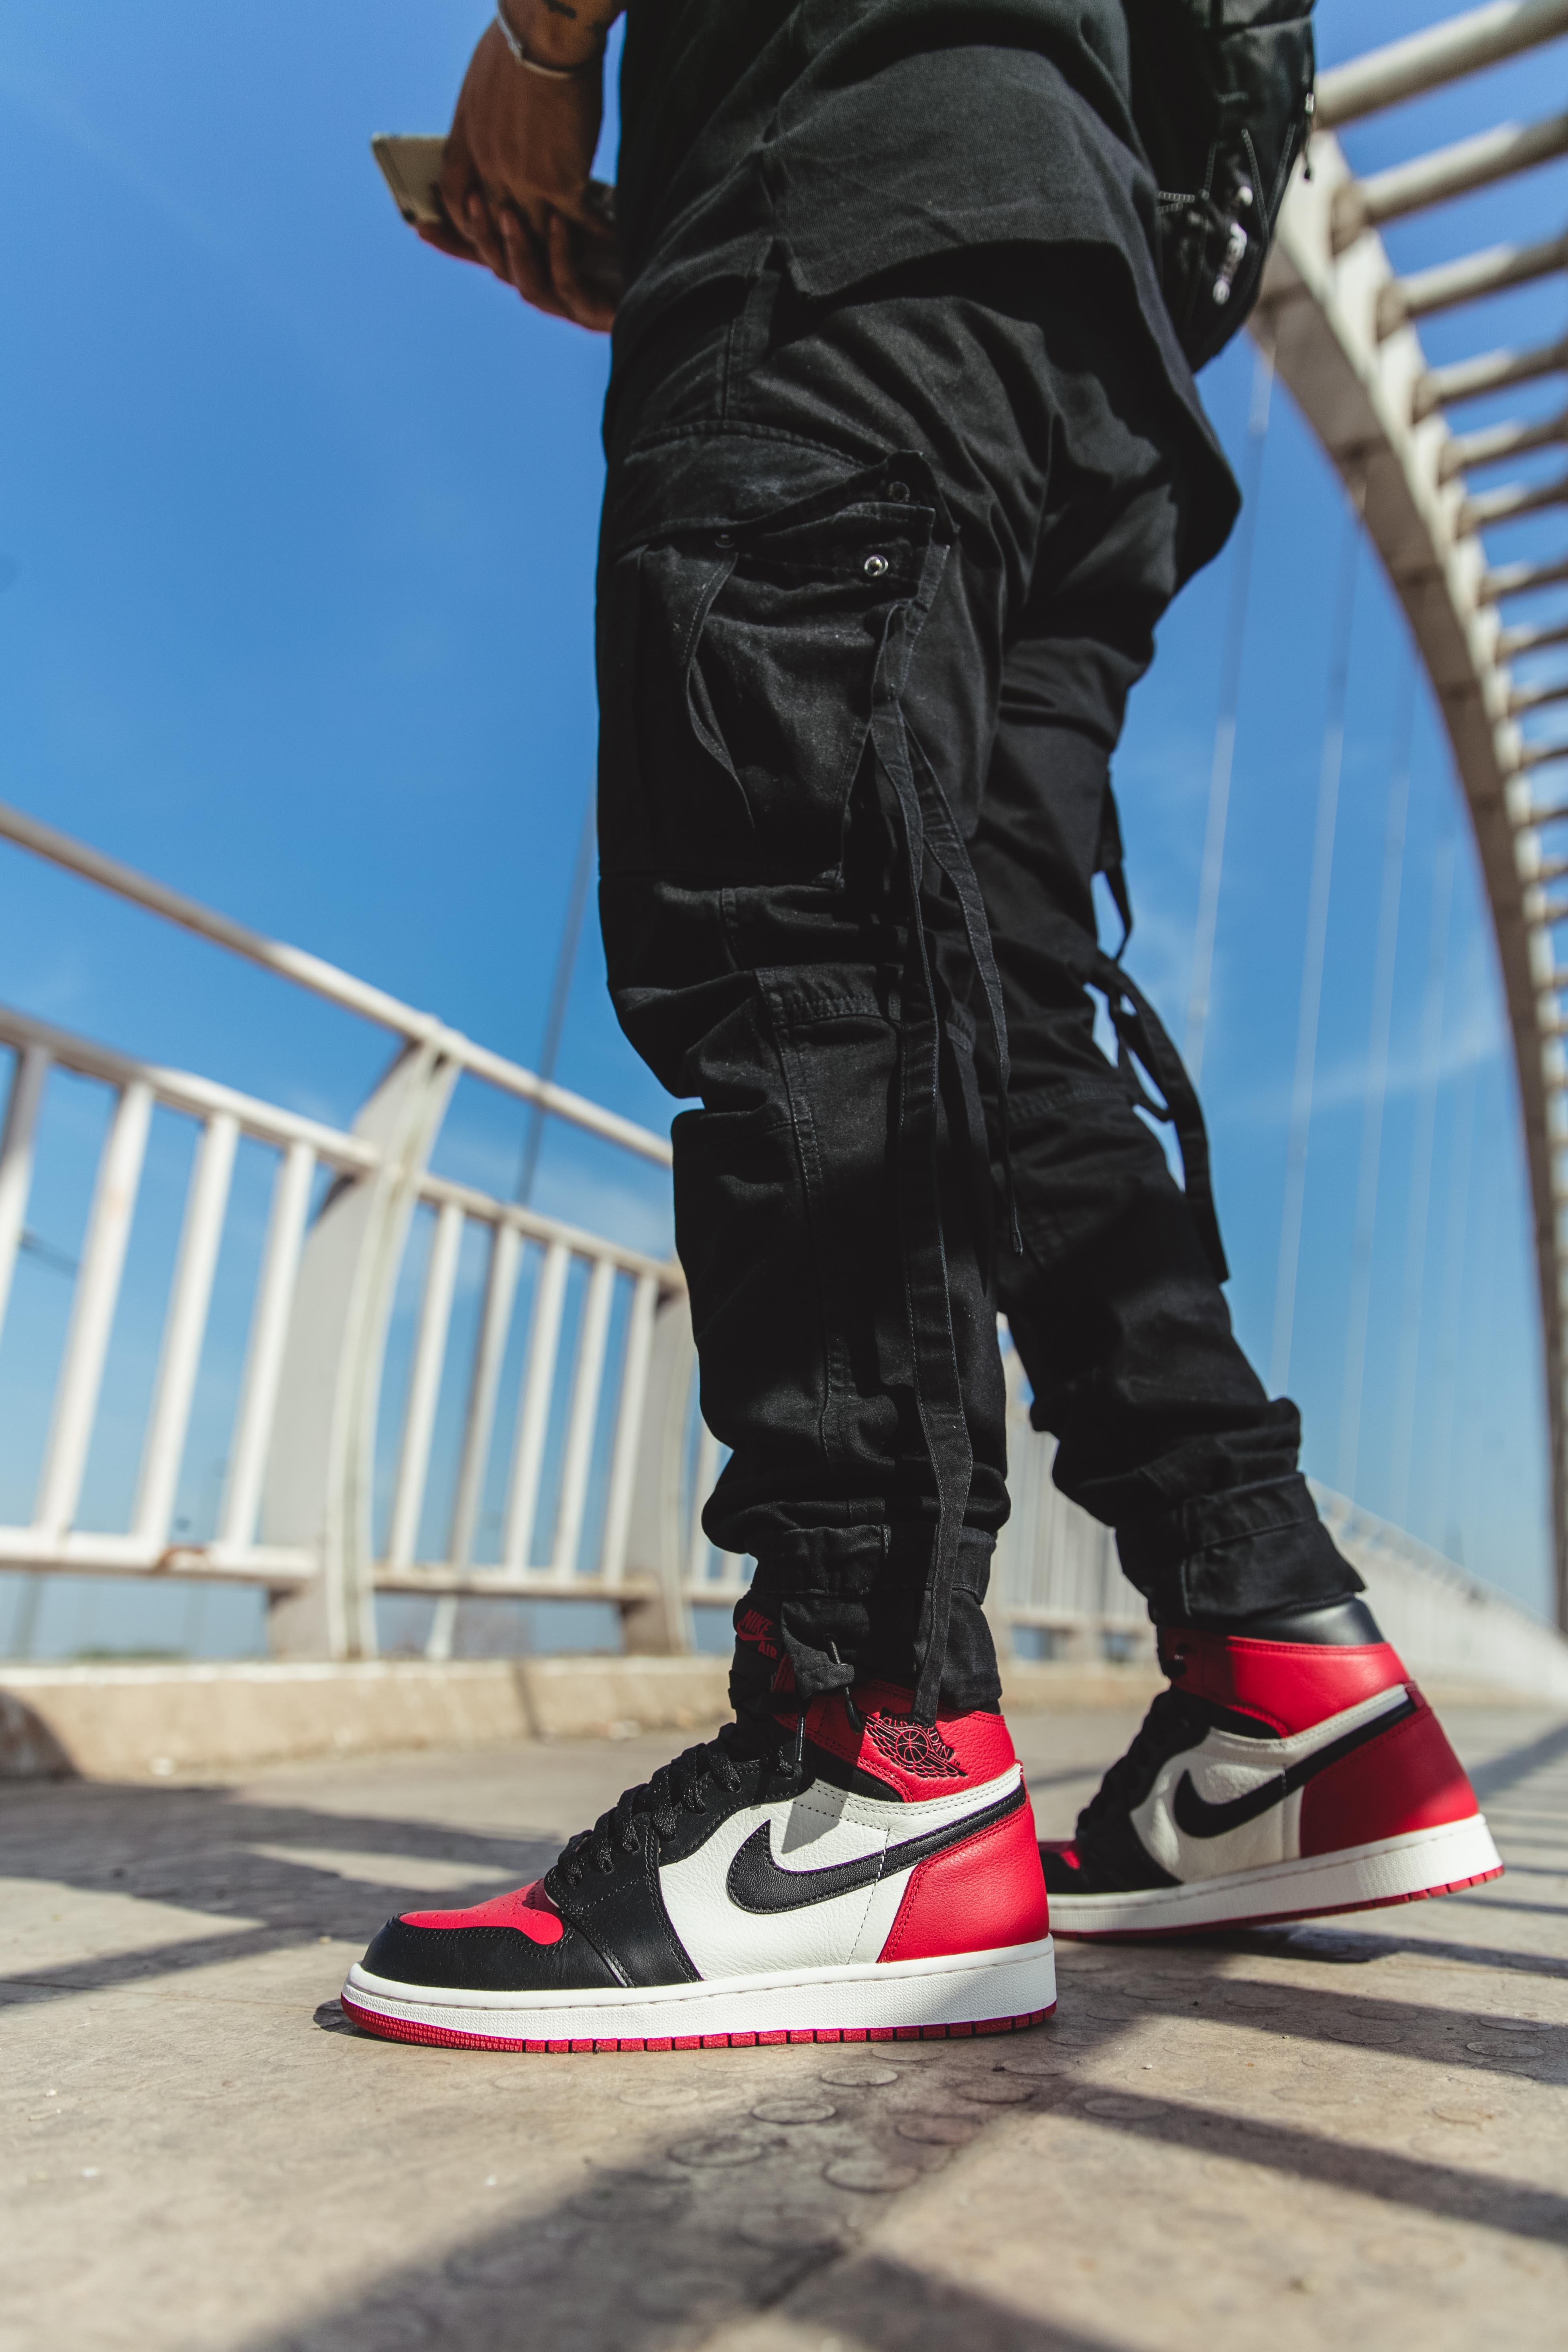 bred 1 outfits